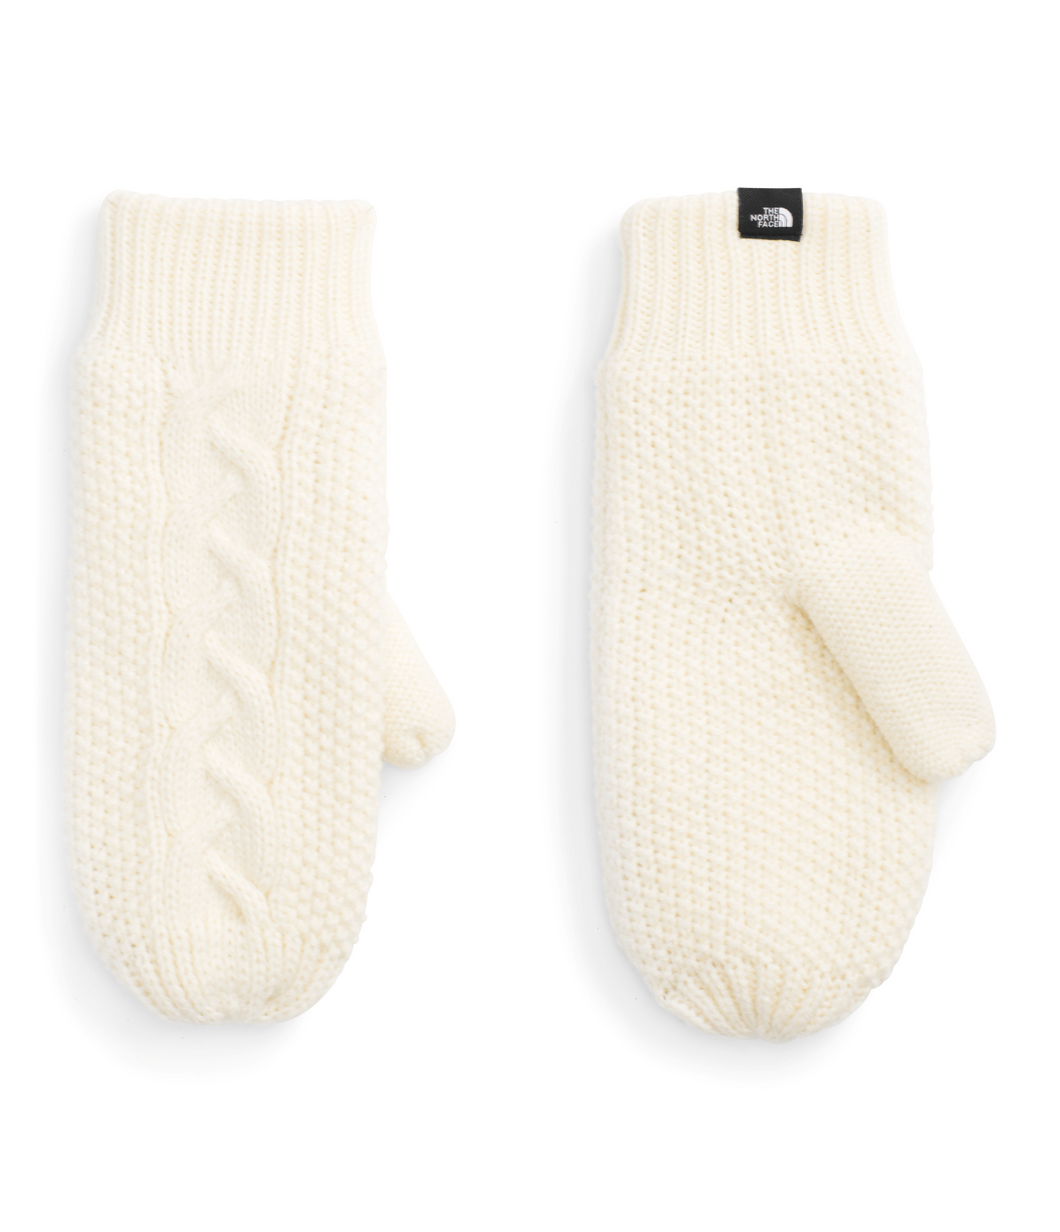 'The North Face' Women's Cable Minna Mitt - Vintage White